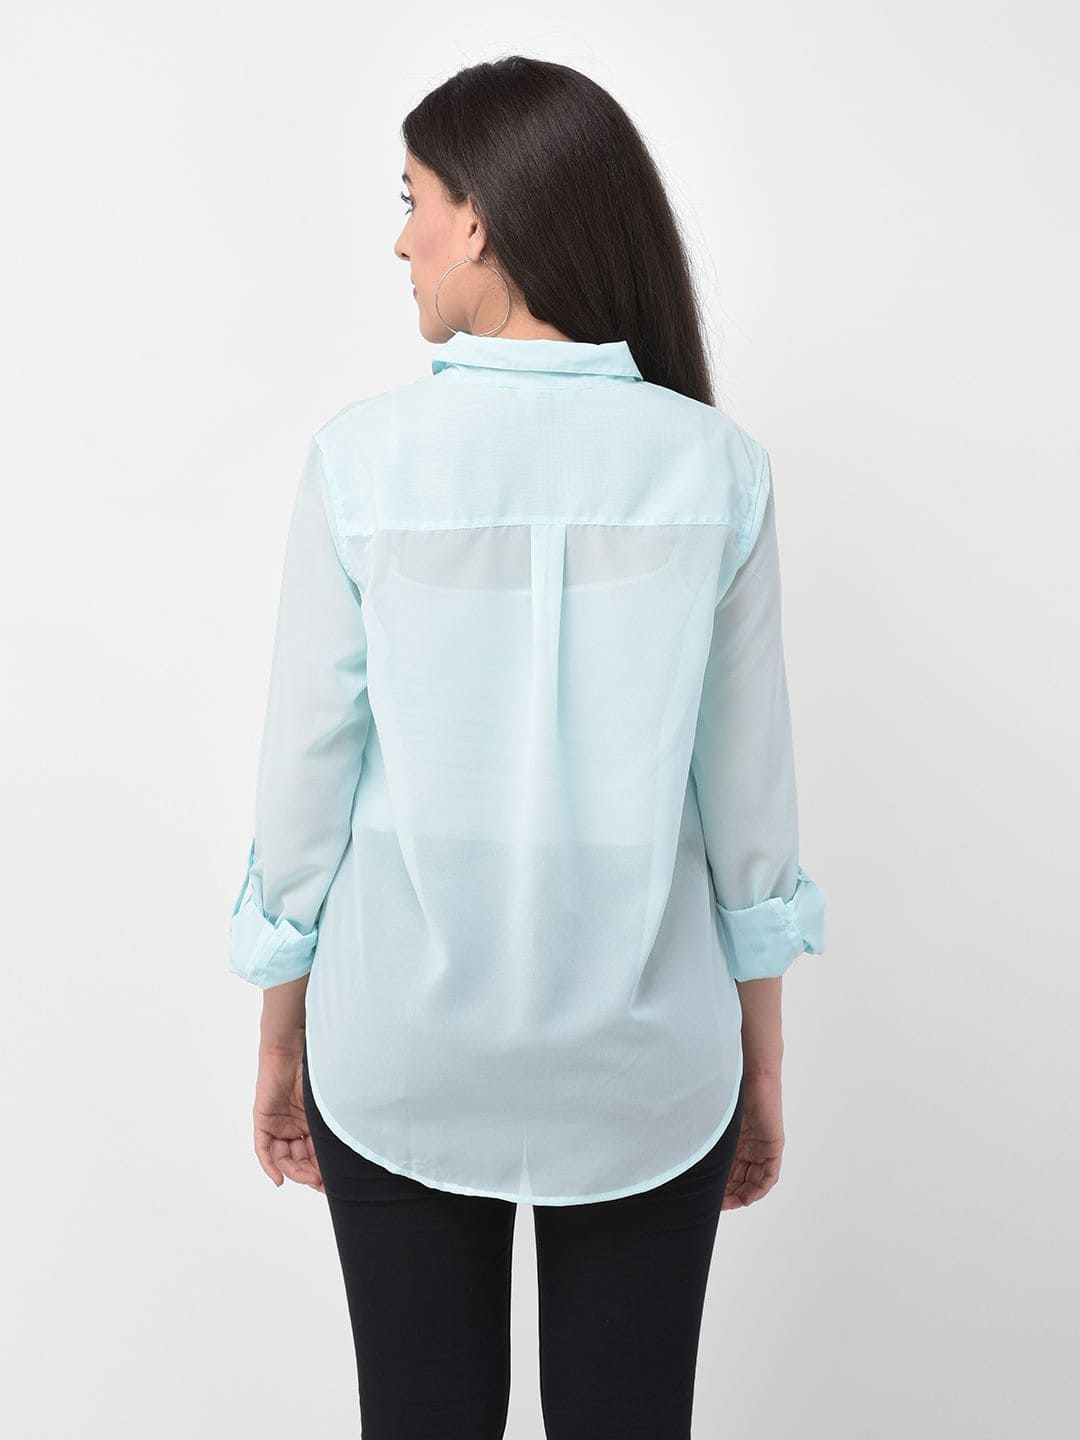 Turquoise Solid Casual Shirt